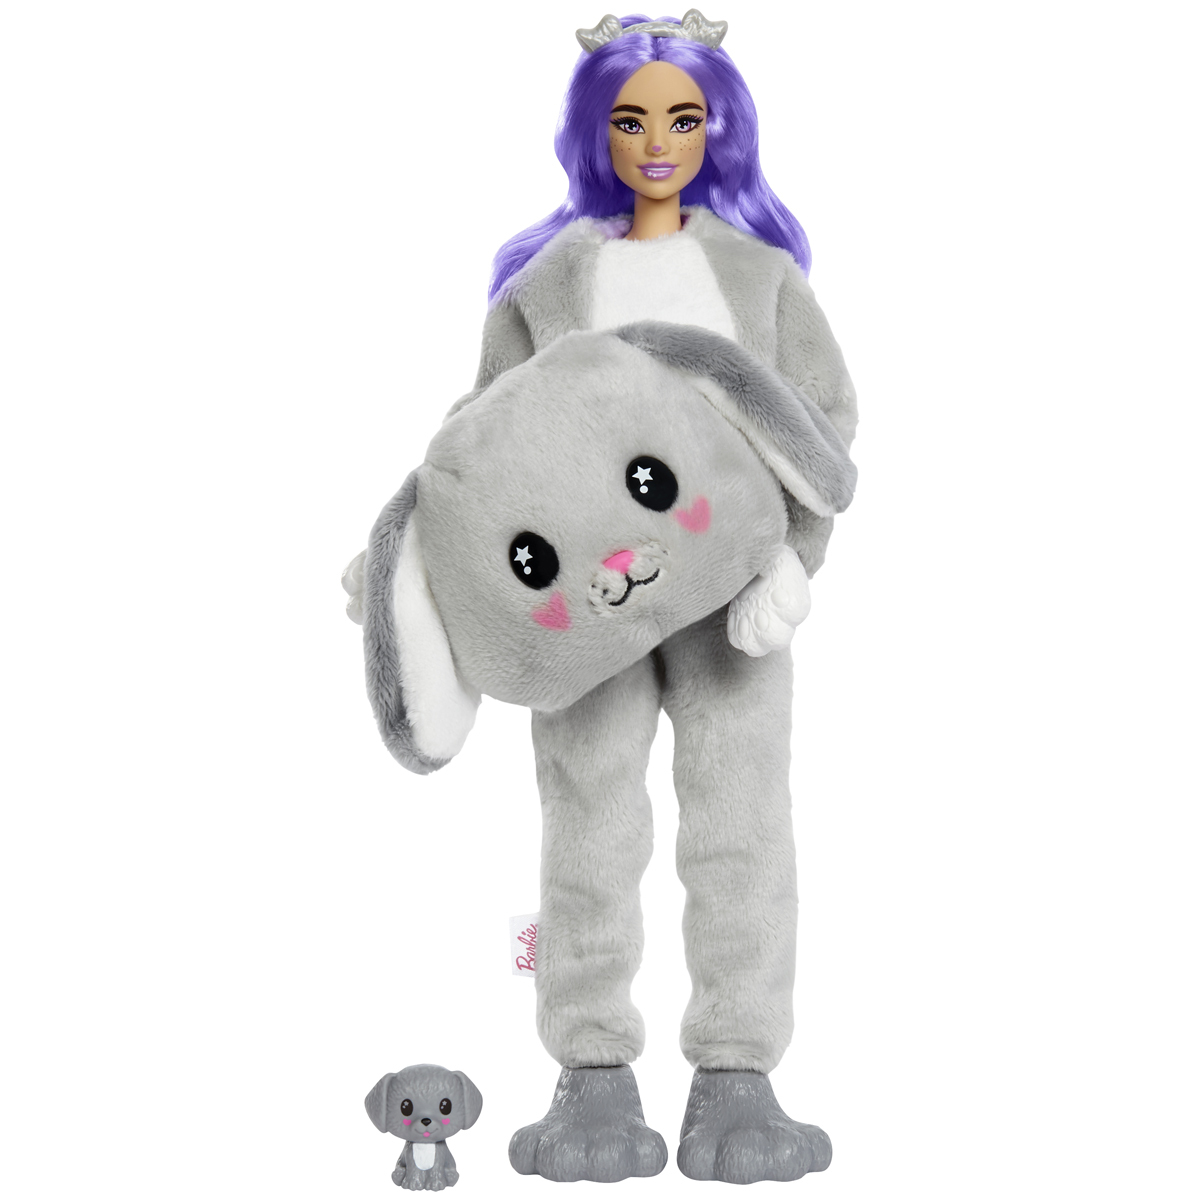 Barbie Cutie Reveal Doll with Puppy Plush and Grey Bunny Costume & 10  Surprises